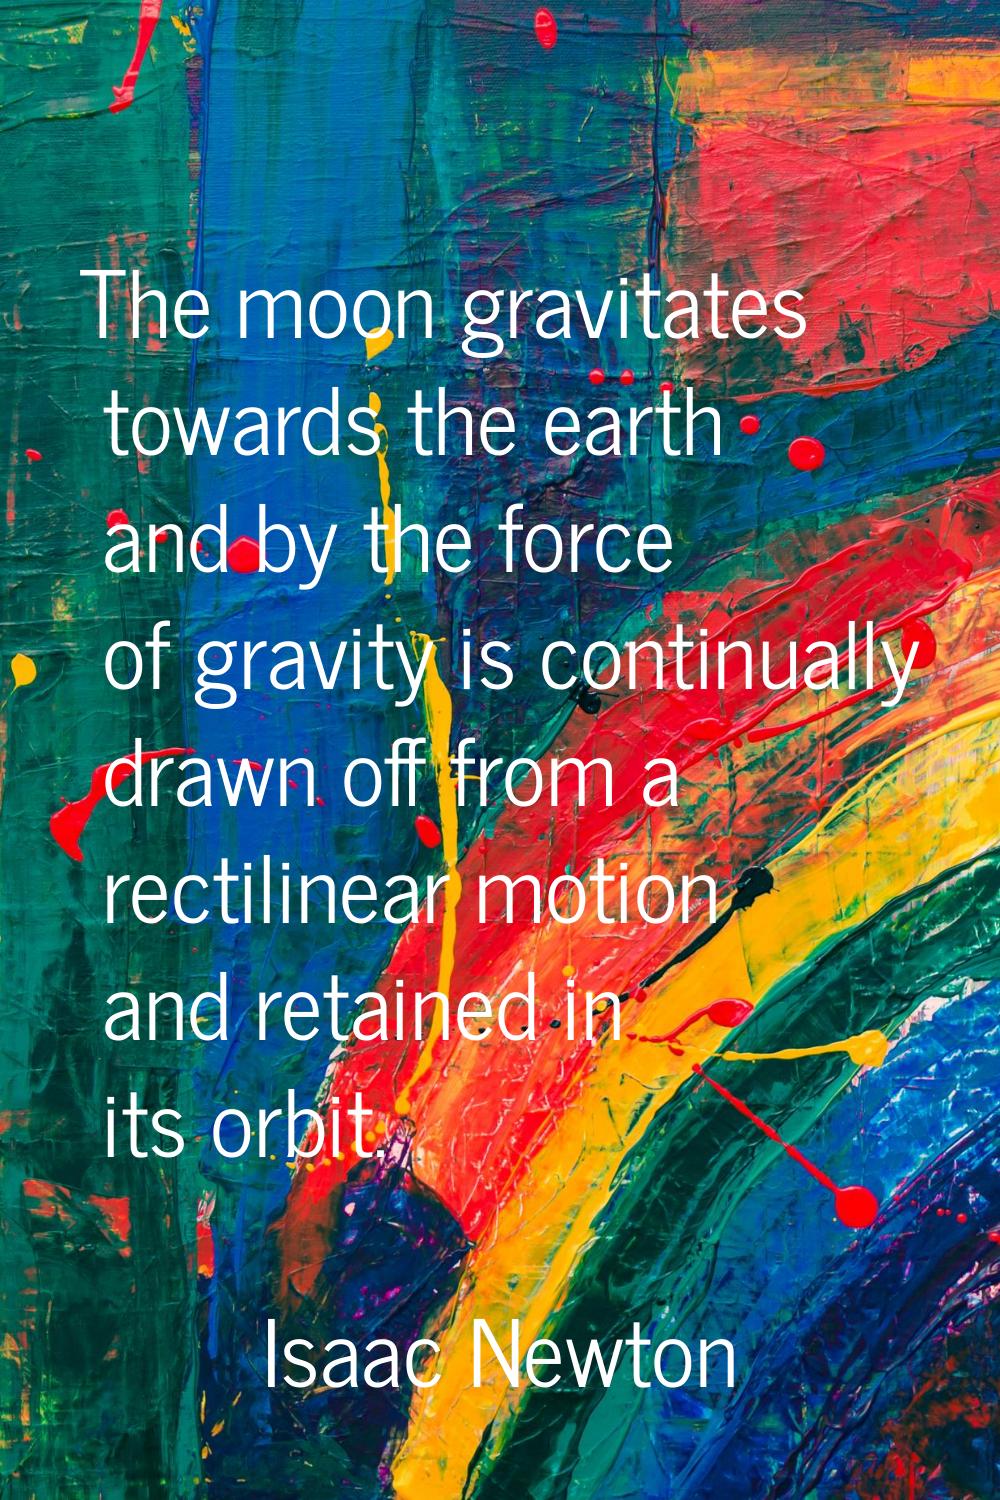 The moon gravitates towards the earth and by the force of gravity is continually drawn off from a r